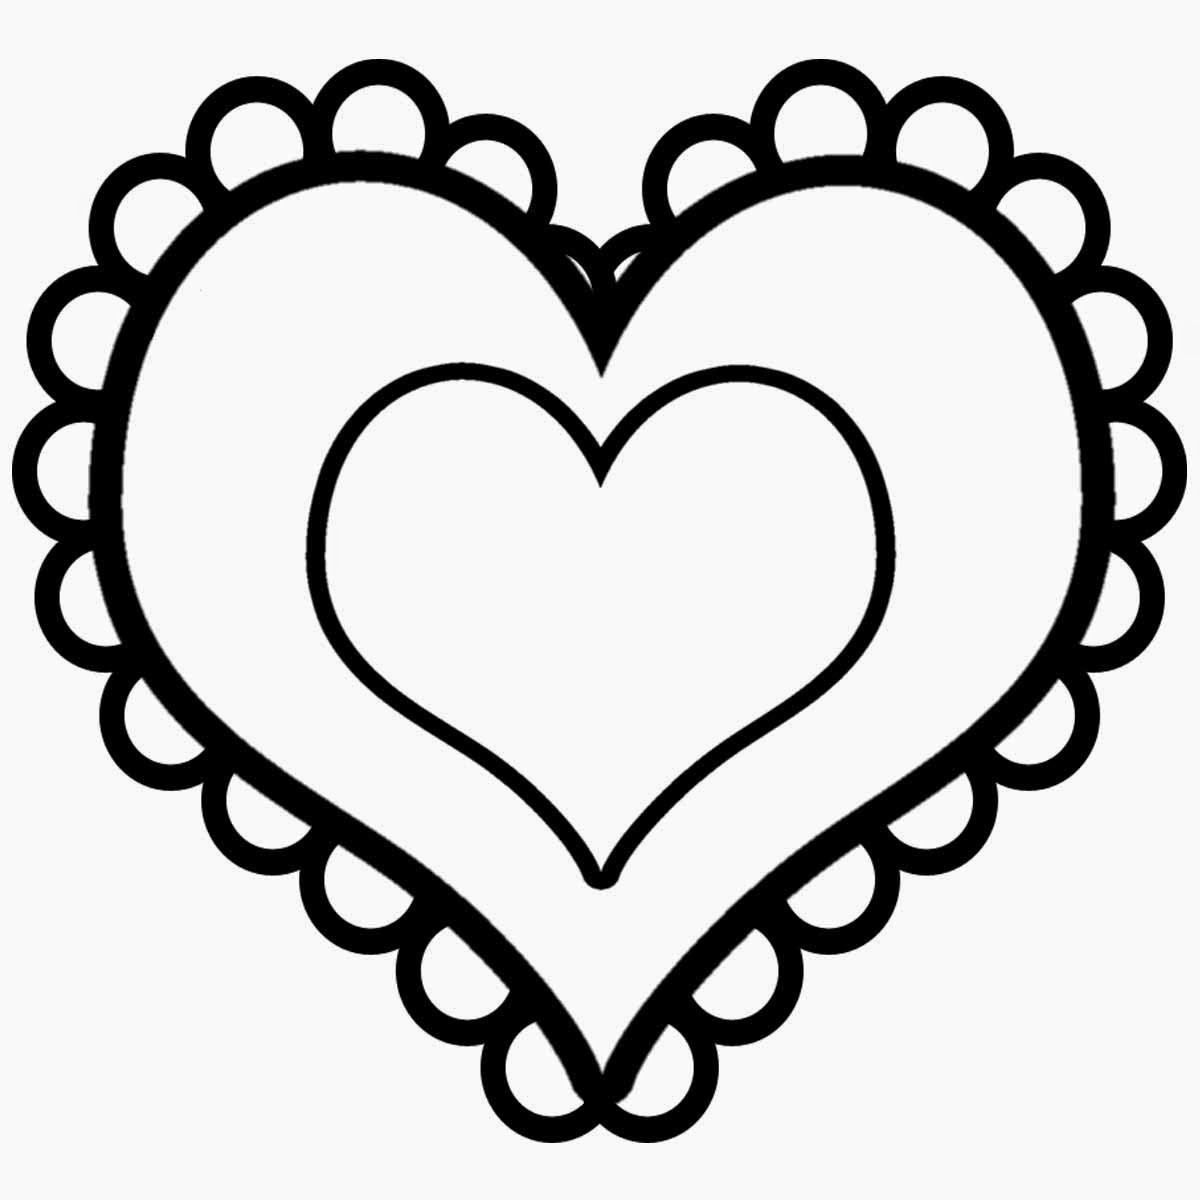 Printable Heart Coloring Pages
 Coloring Pages Hearts Free Printable Coloring Pages for